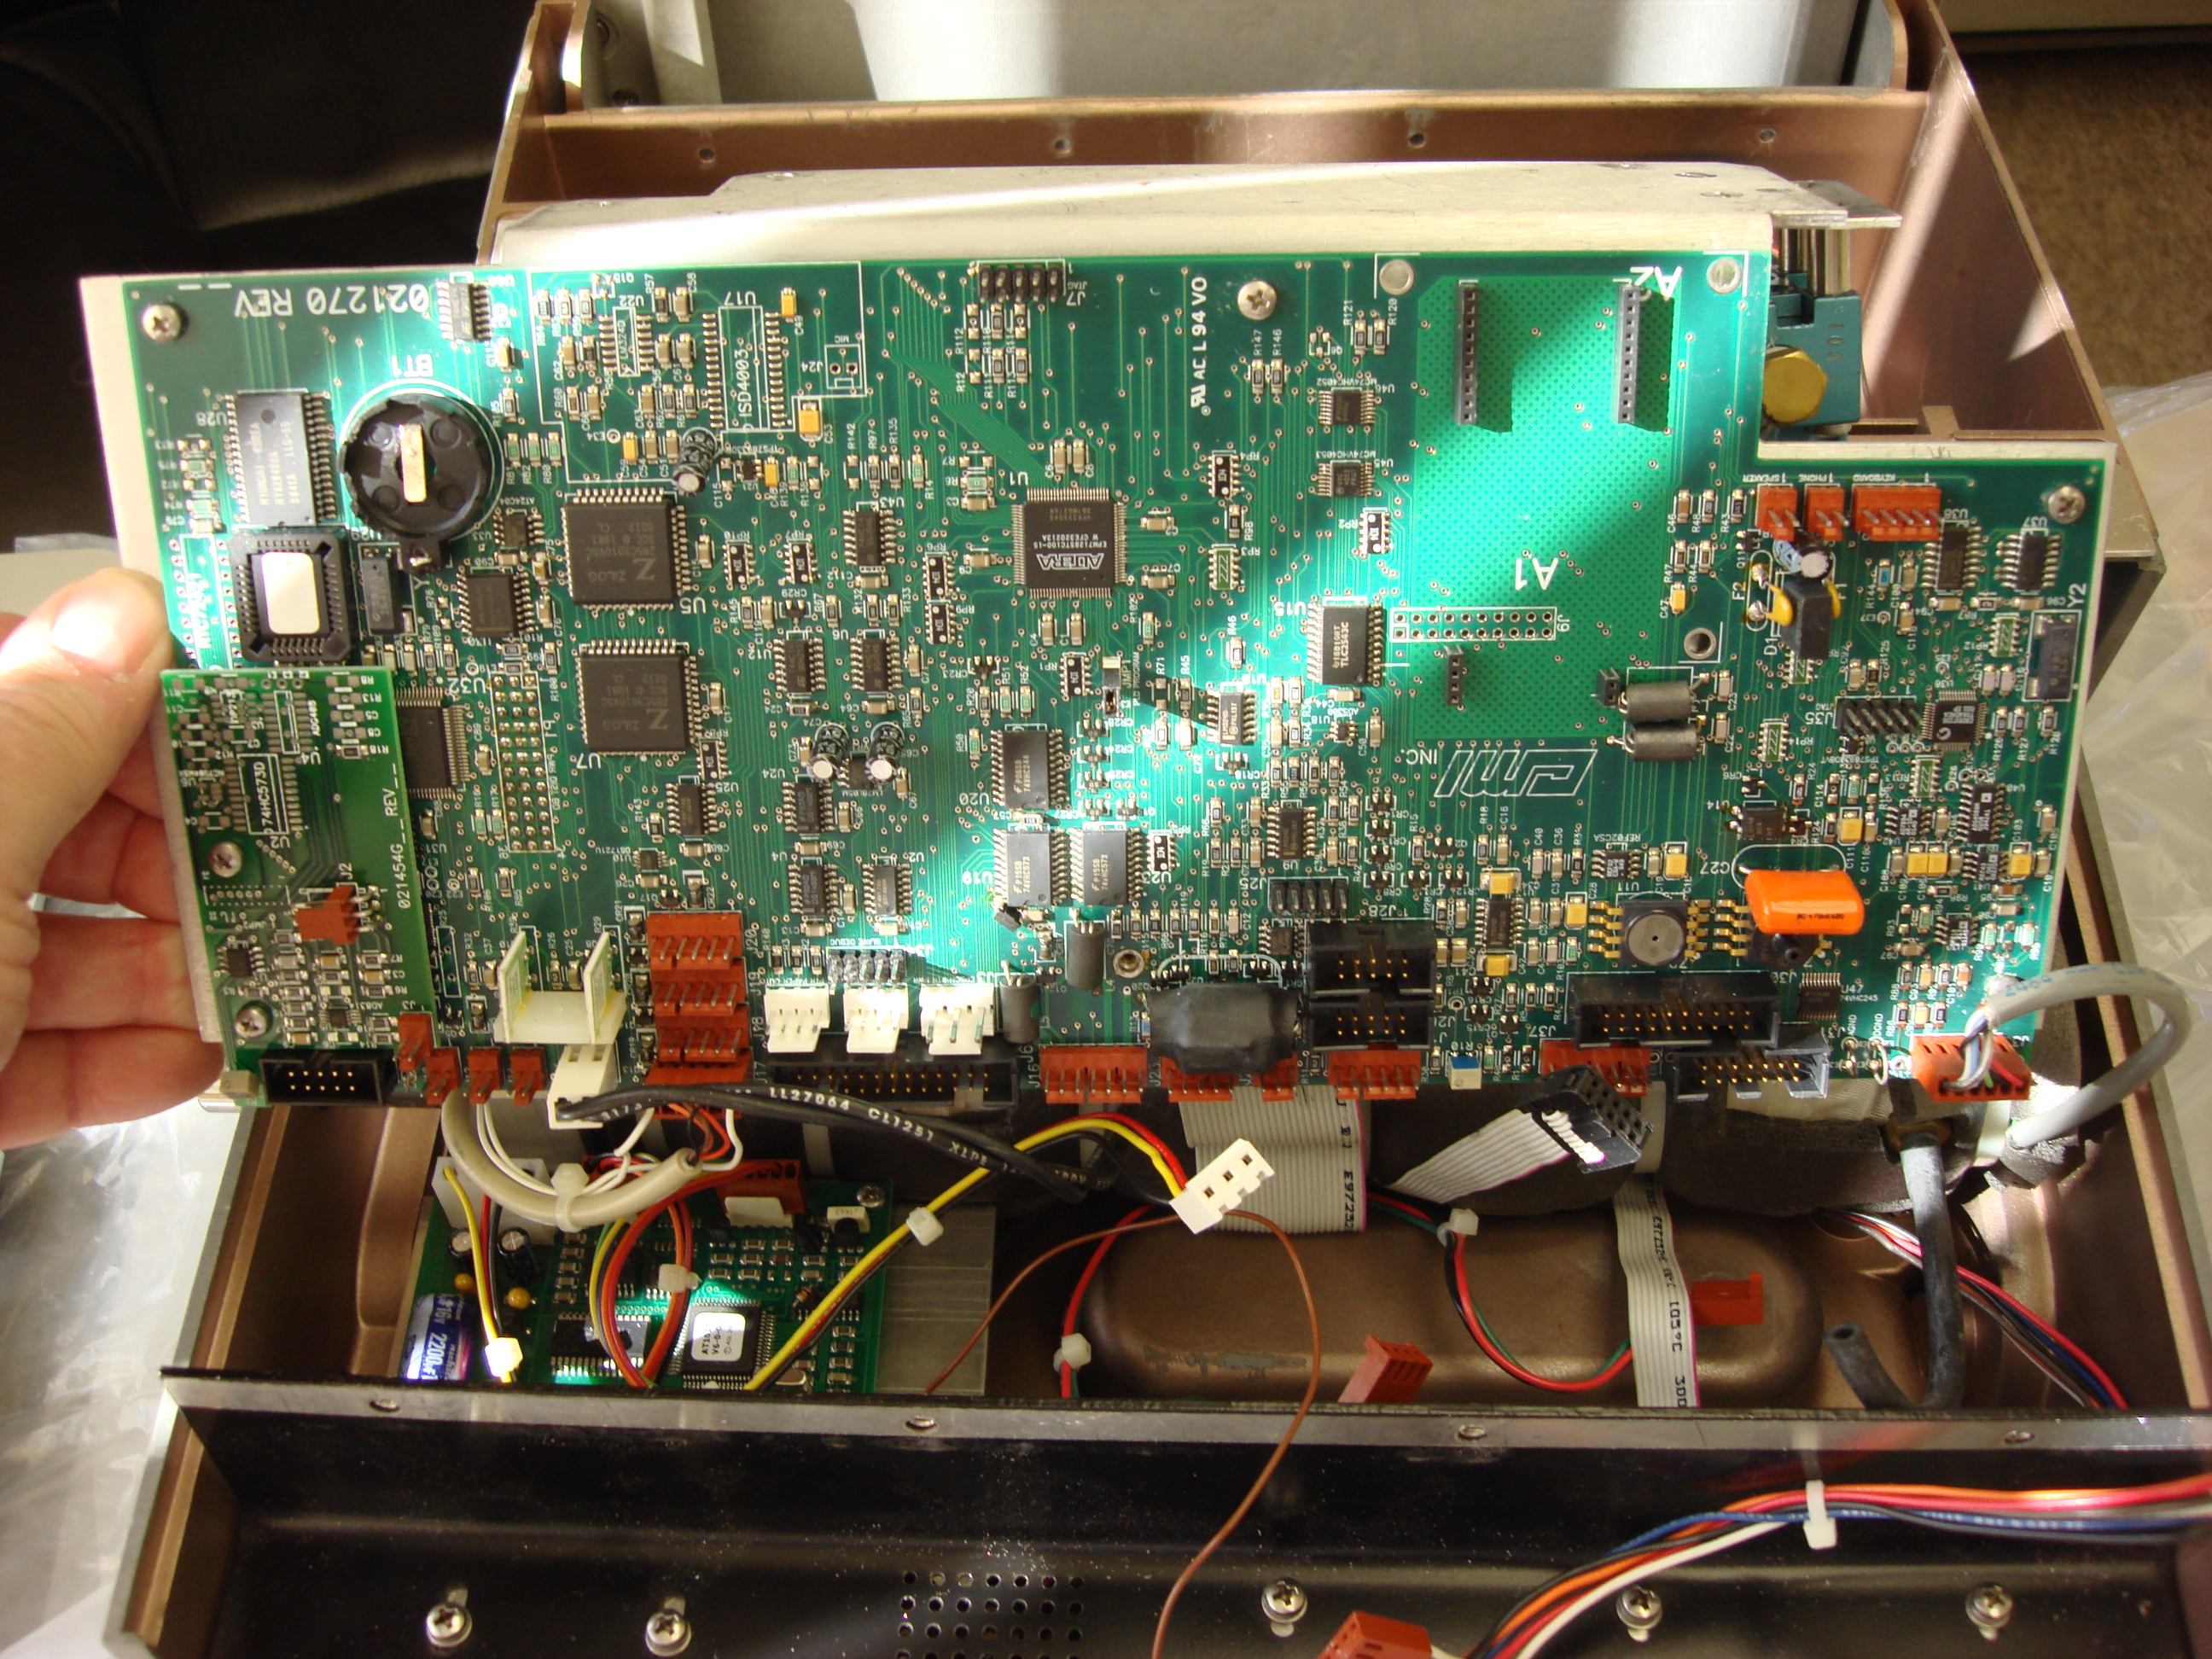 Opened Case of Intoxilyzer 8000 Showing Circuit Board